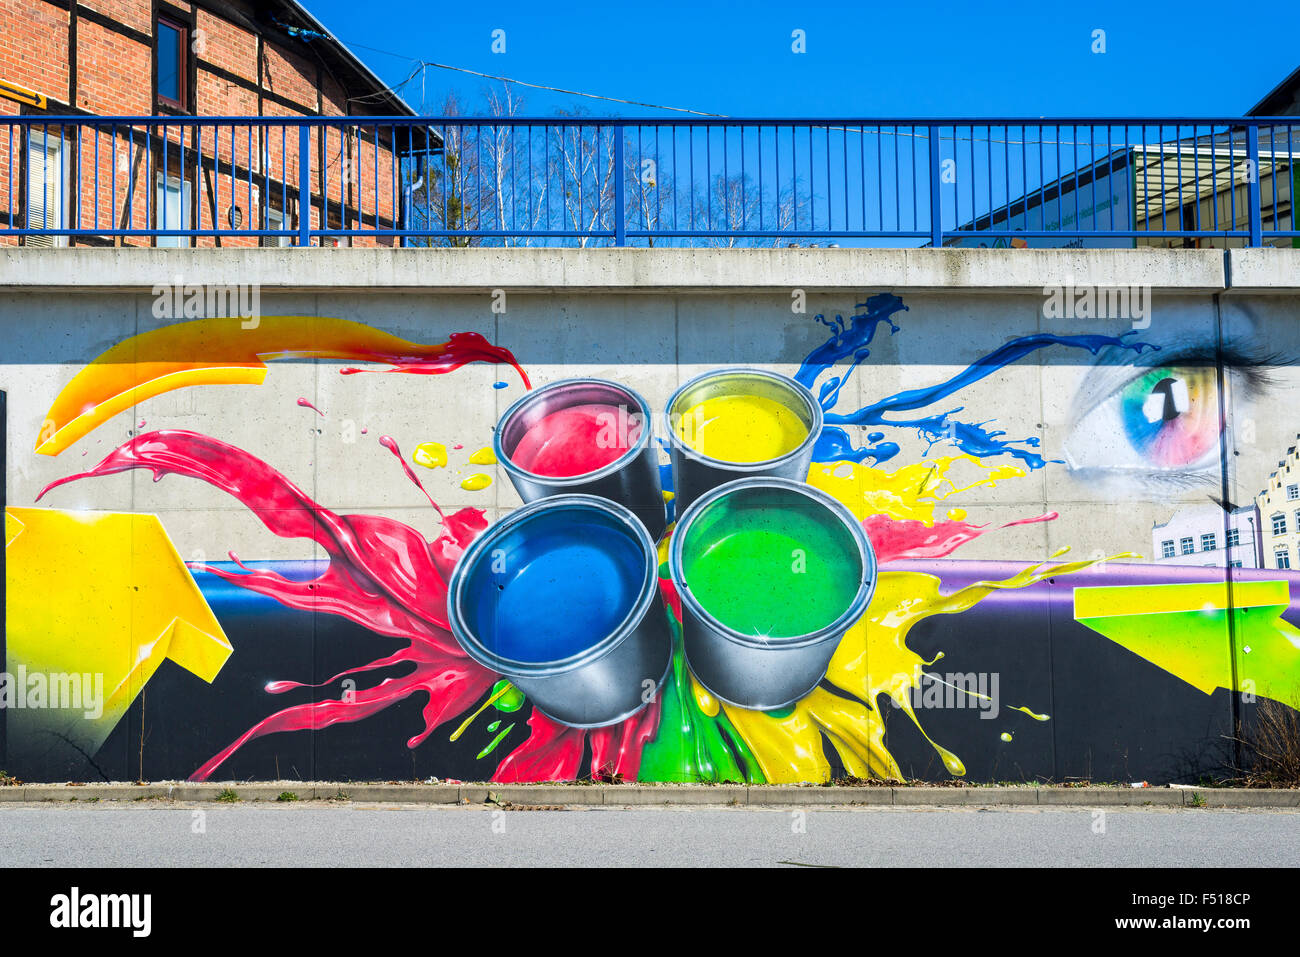 Colorful graffity showing color cans is sprayed on a wall Stock Photo